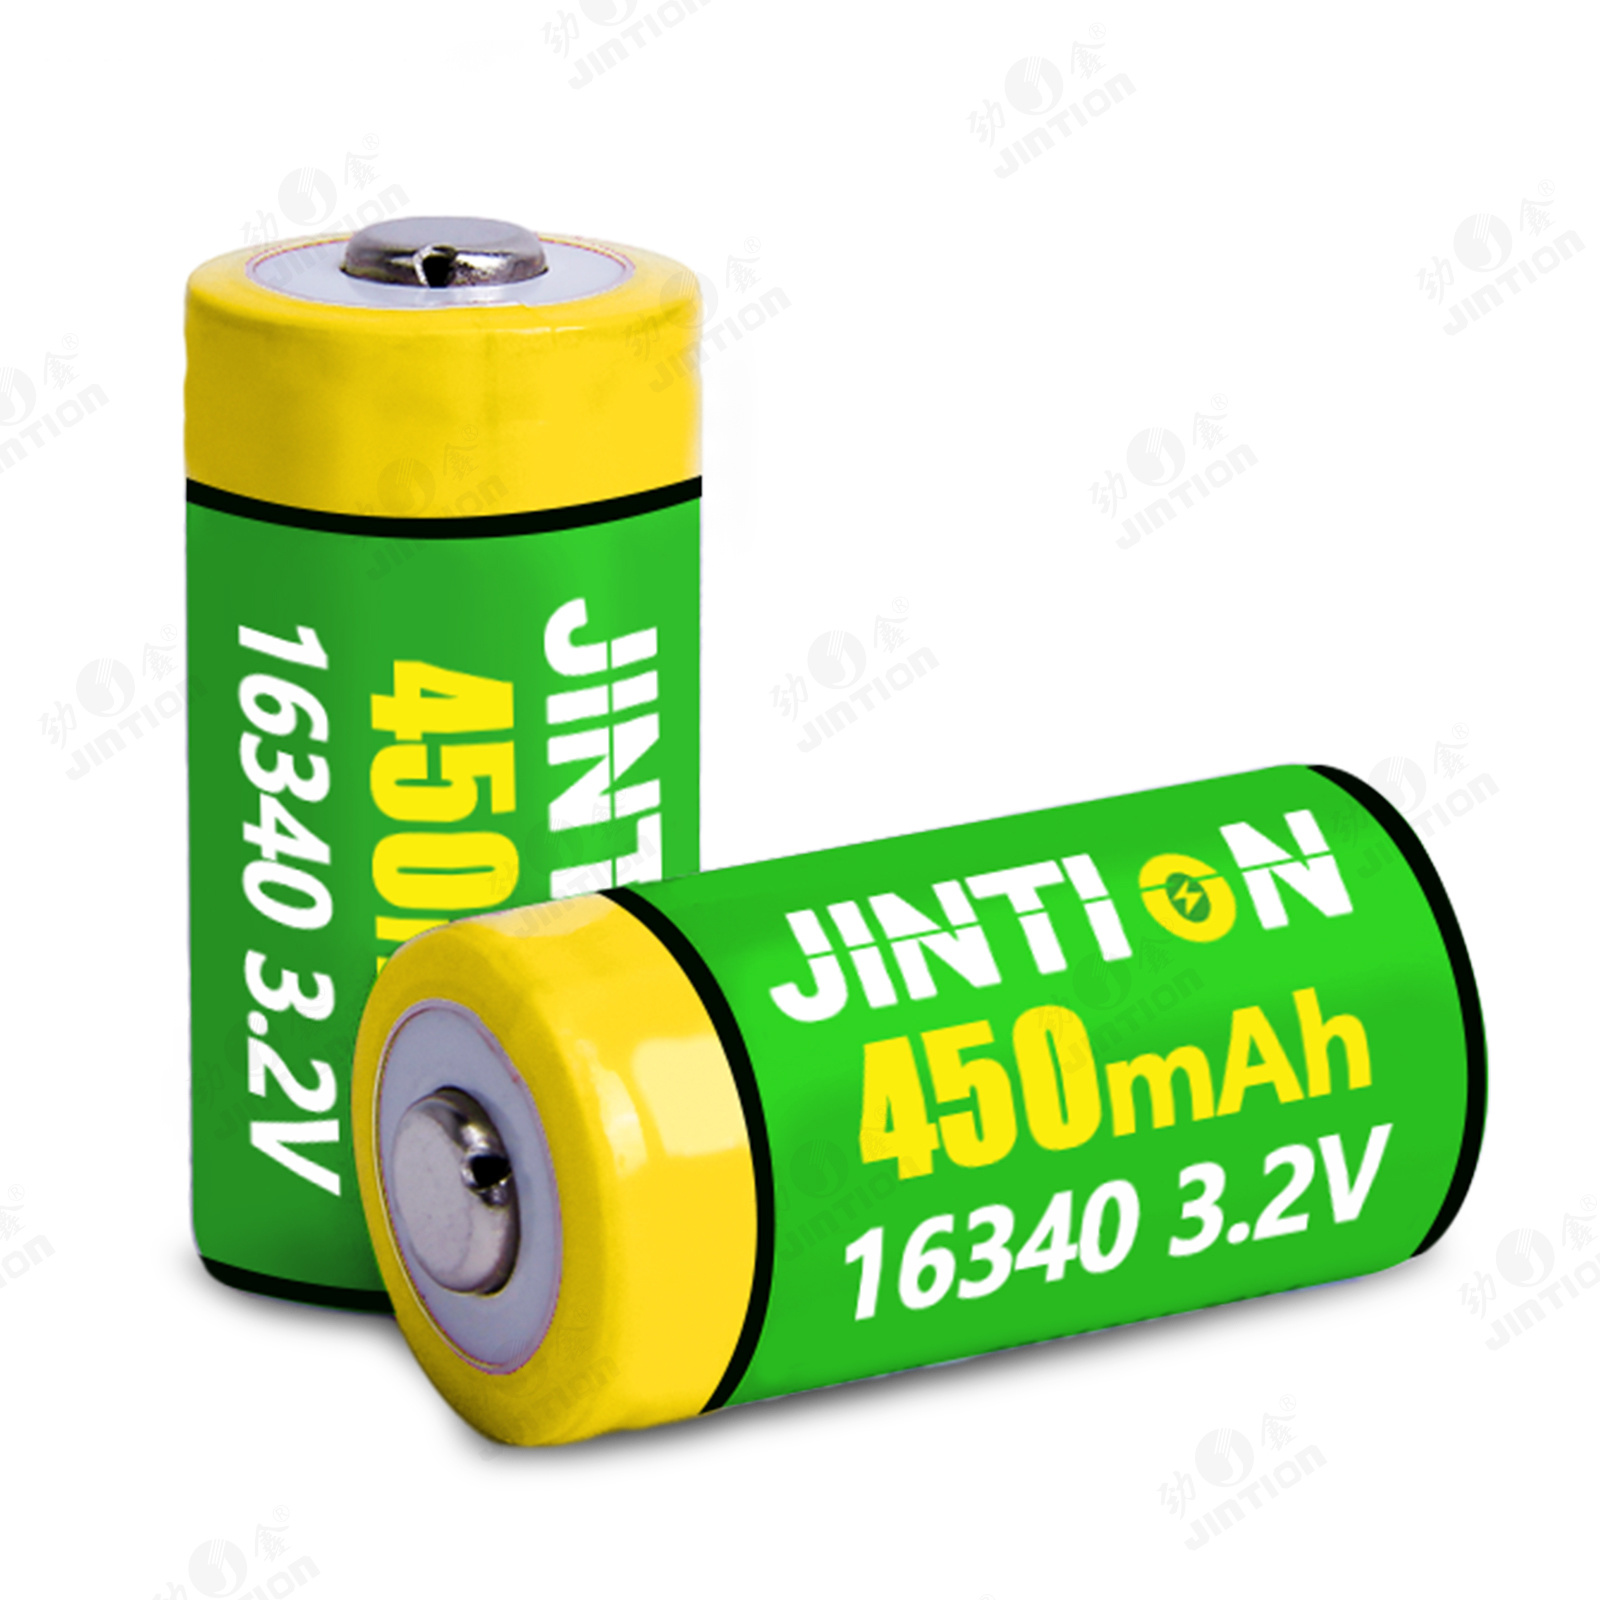 JINTION 16340 450mah 3.2v battery cells 16340 lifepo4 battery IFR 16340 Rechargeable Battery Cell CR123A for Streamlight 85177